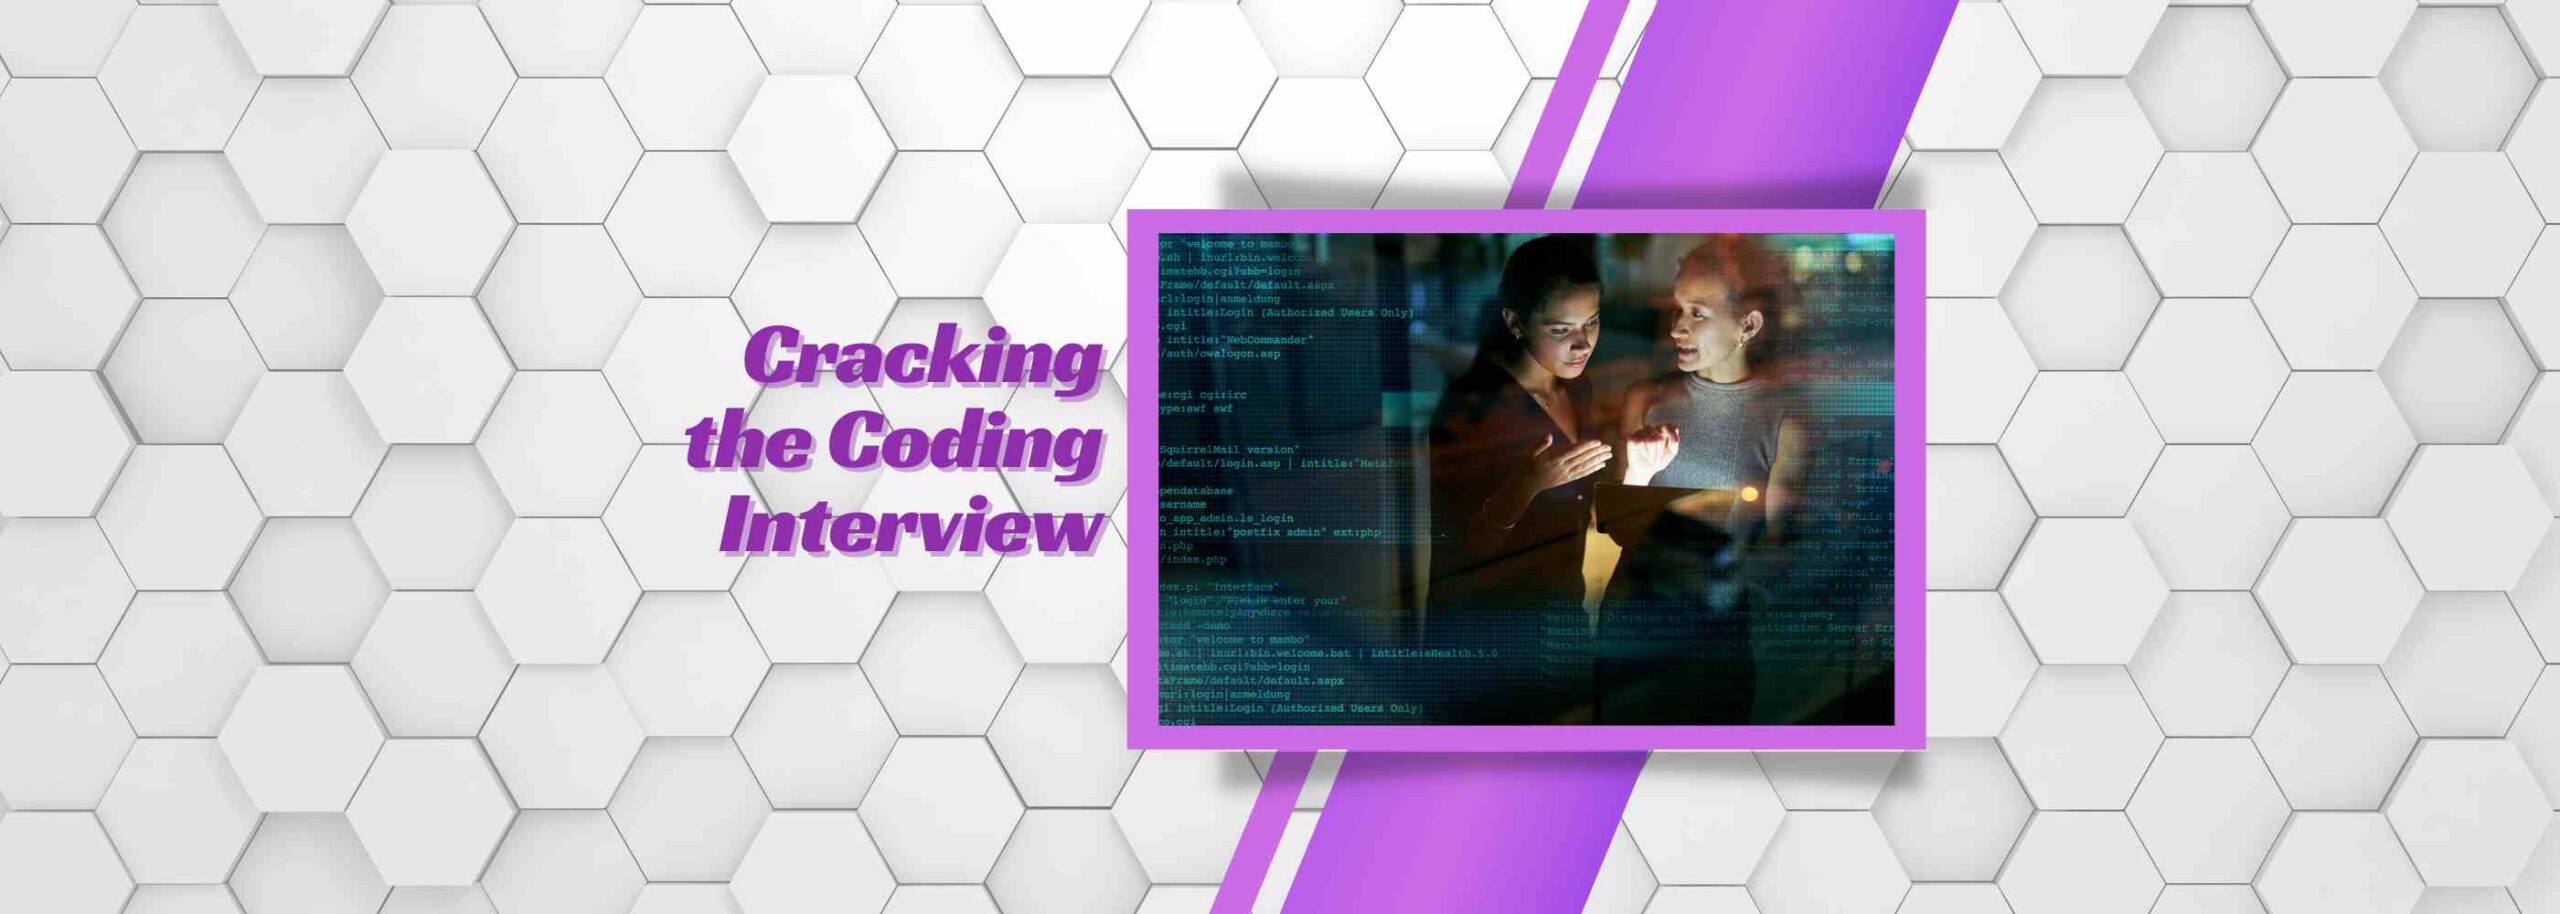 Tips for Cracking the Coding Interview DataTrained